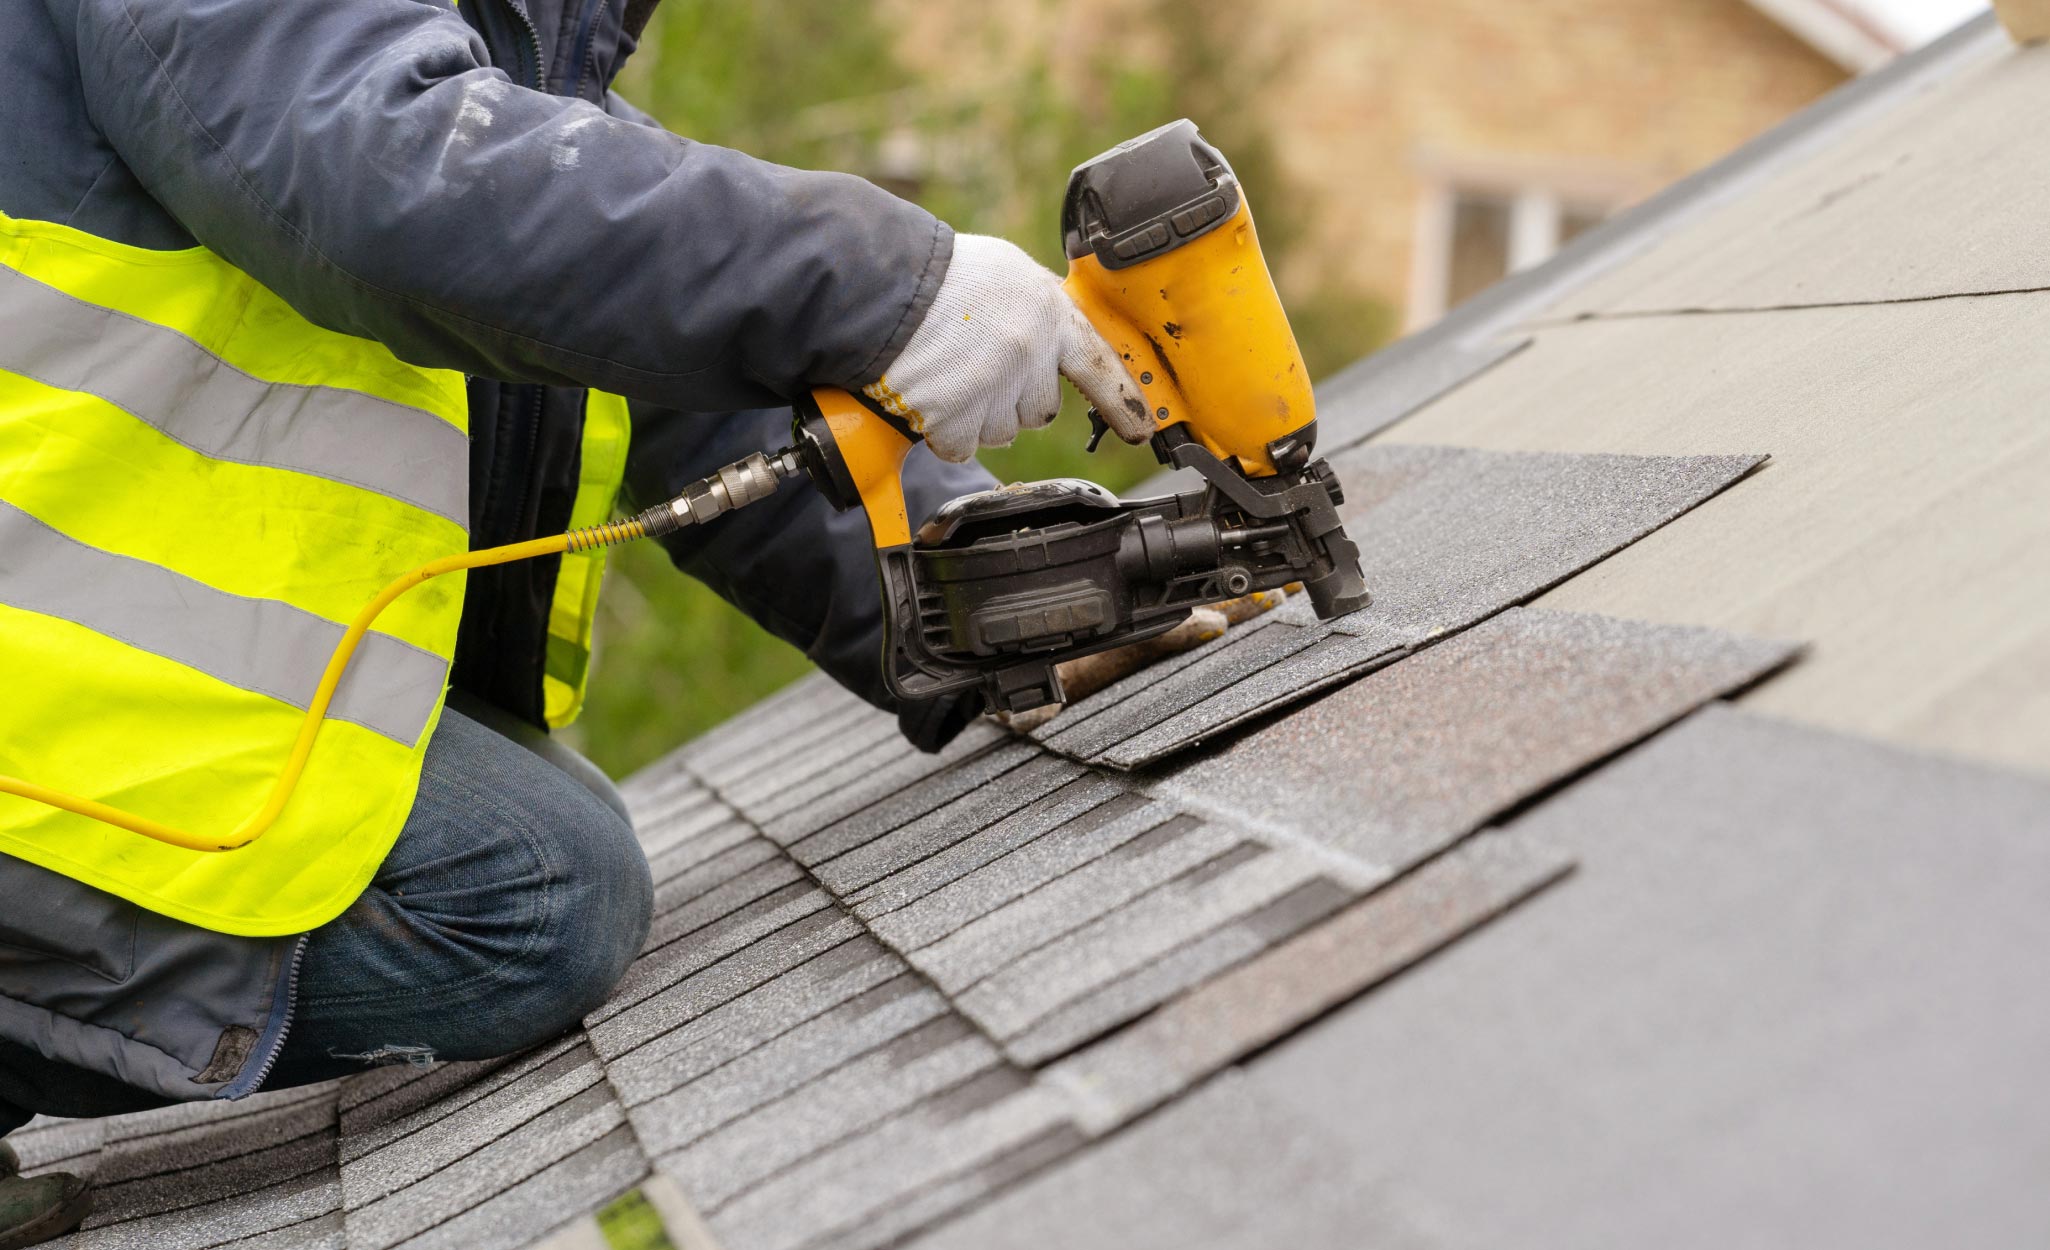 A Pro replaces shingles on the roof of a house.